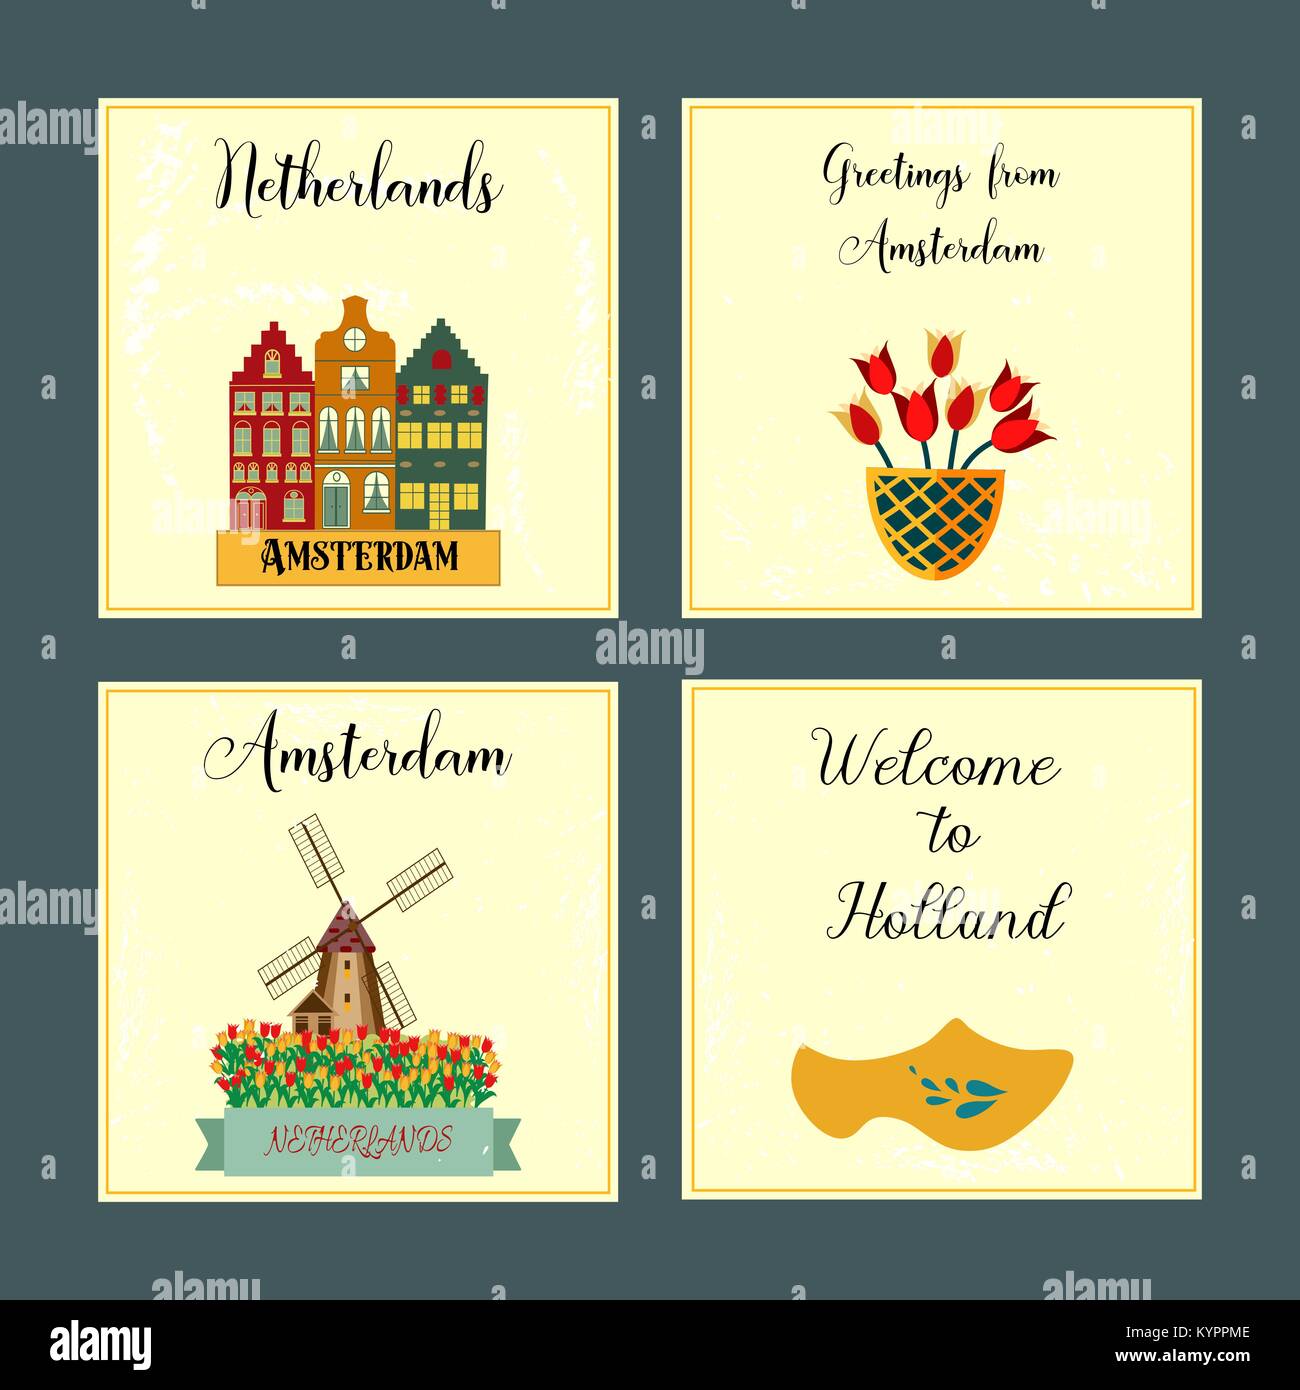 Holland travel cultural and sightseeing symbols frame background poster .Vector illustration. Stock Vector